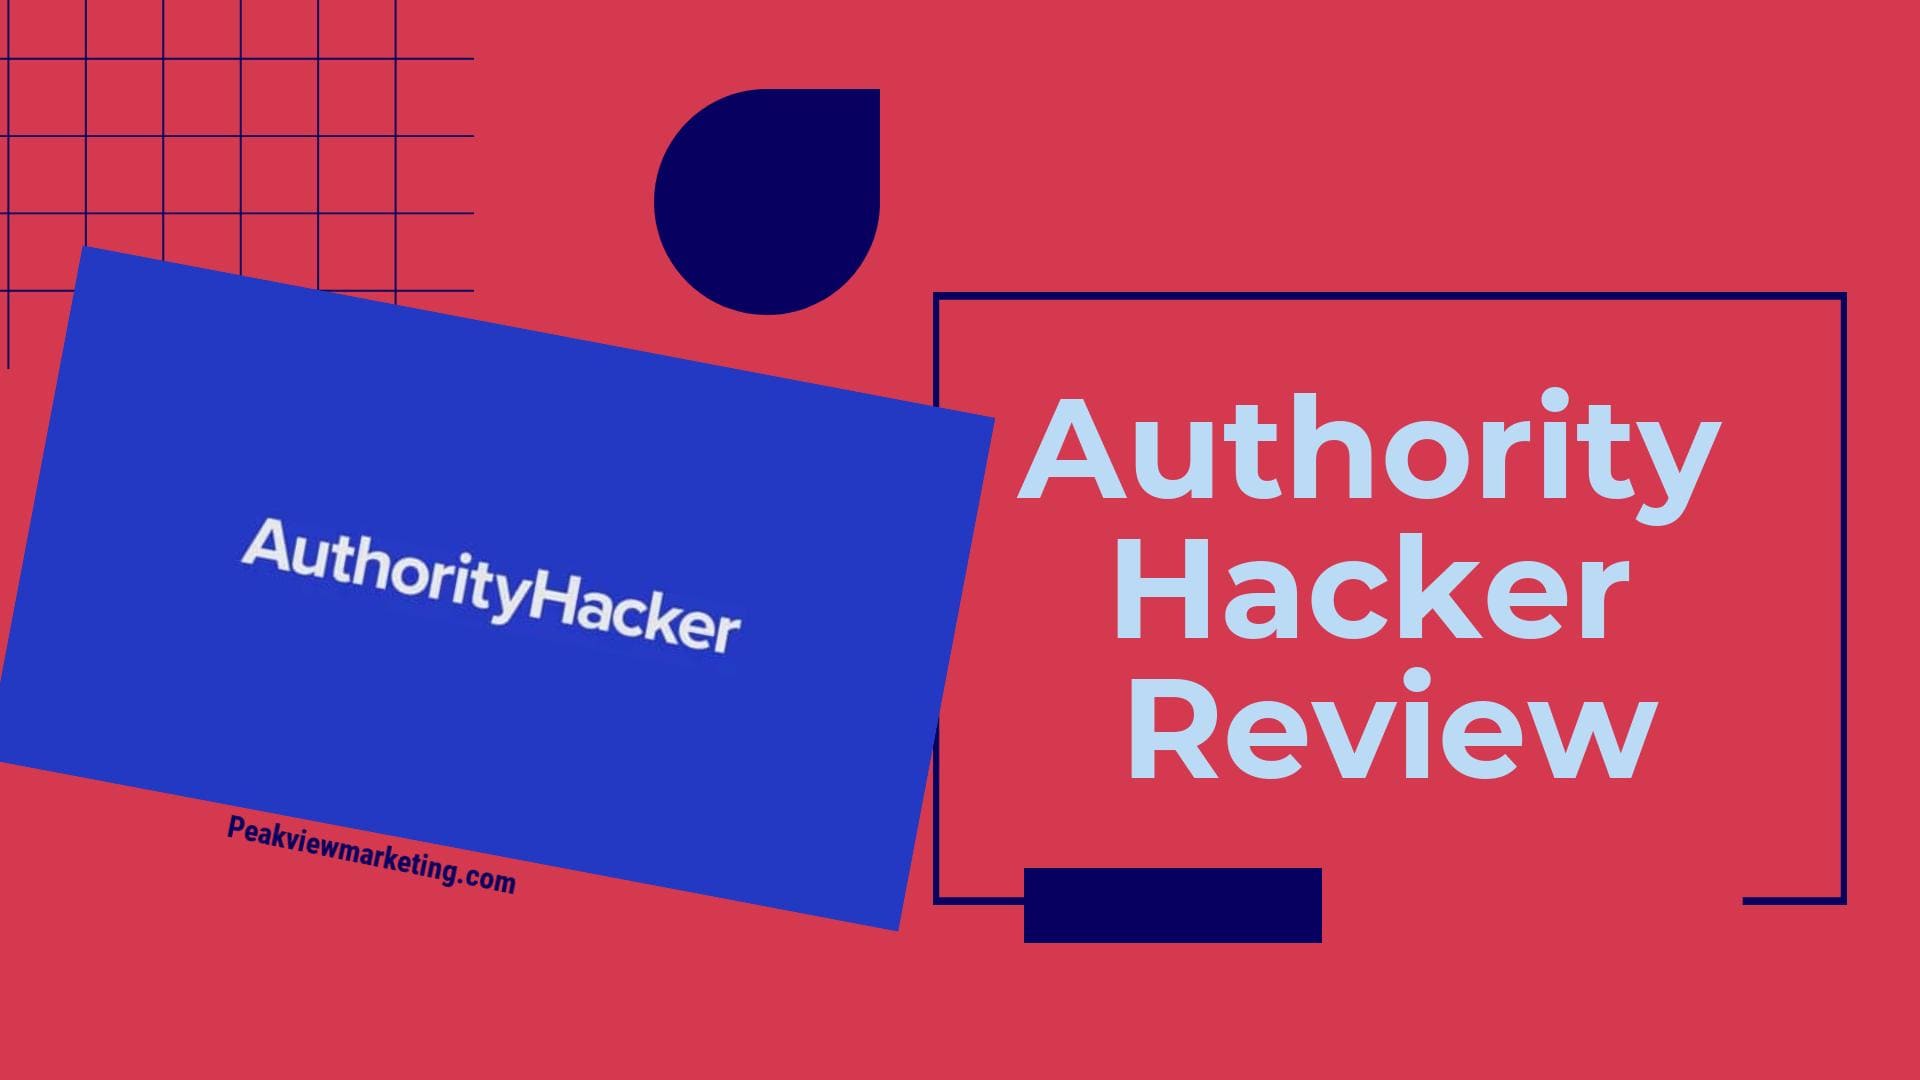 Authority Hacker Review Image